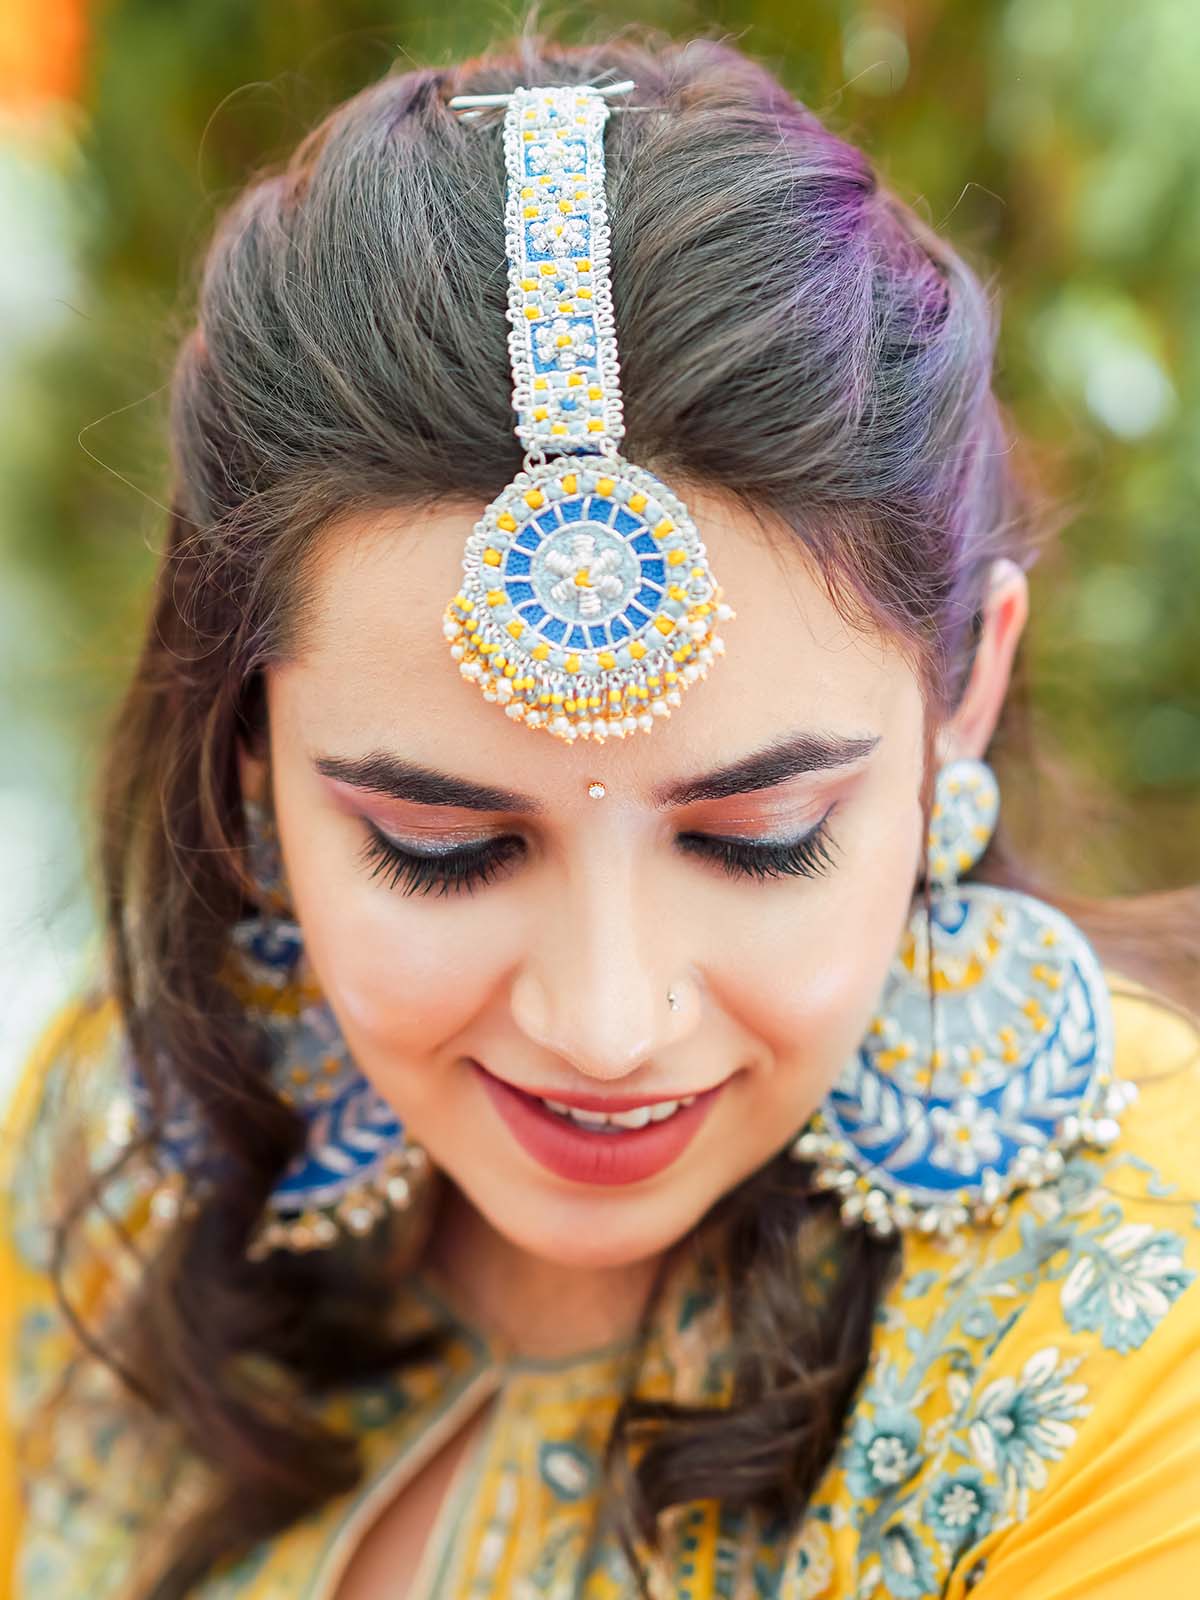 Bridal Jhoomar designs to Swoon Over - Our Fav Paasa Designs Fab Real Brides  Flaunted! - Witty Vows